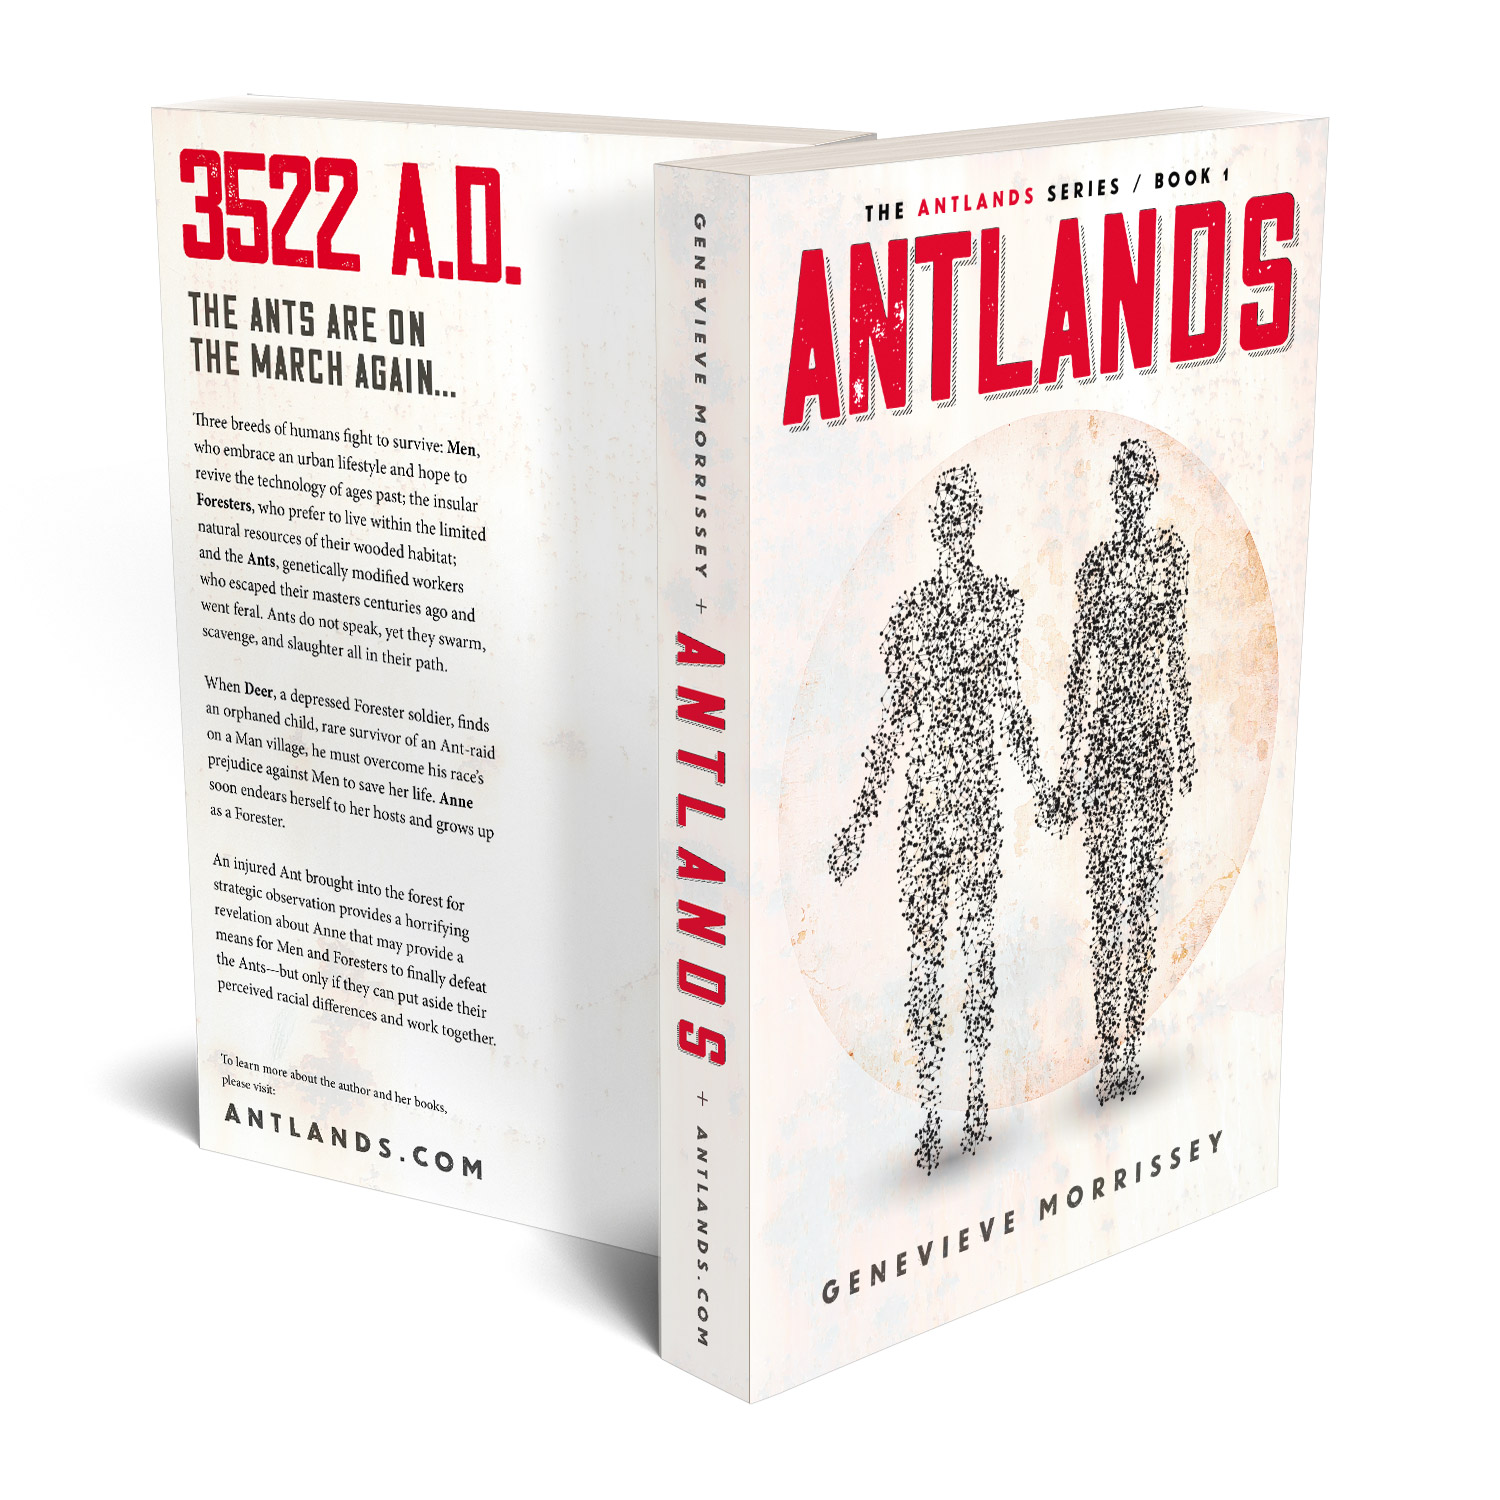 'Antlands' is an immersive, post-apocalyse scifi novel. The author is Genevieve Morrissey. The book cover design and interior formatting are by Mark Thomas. To learn more about what Mark could do for your book, please visit coverness.com.